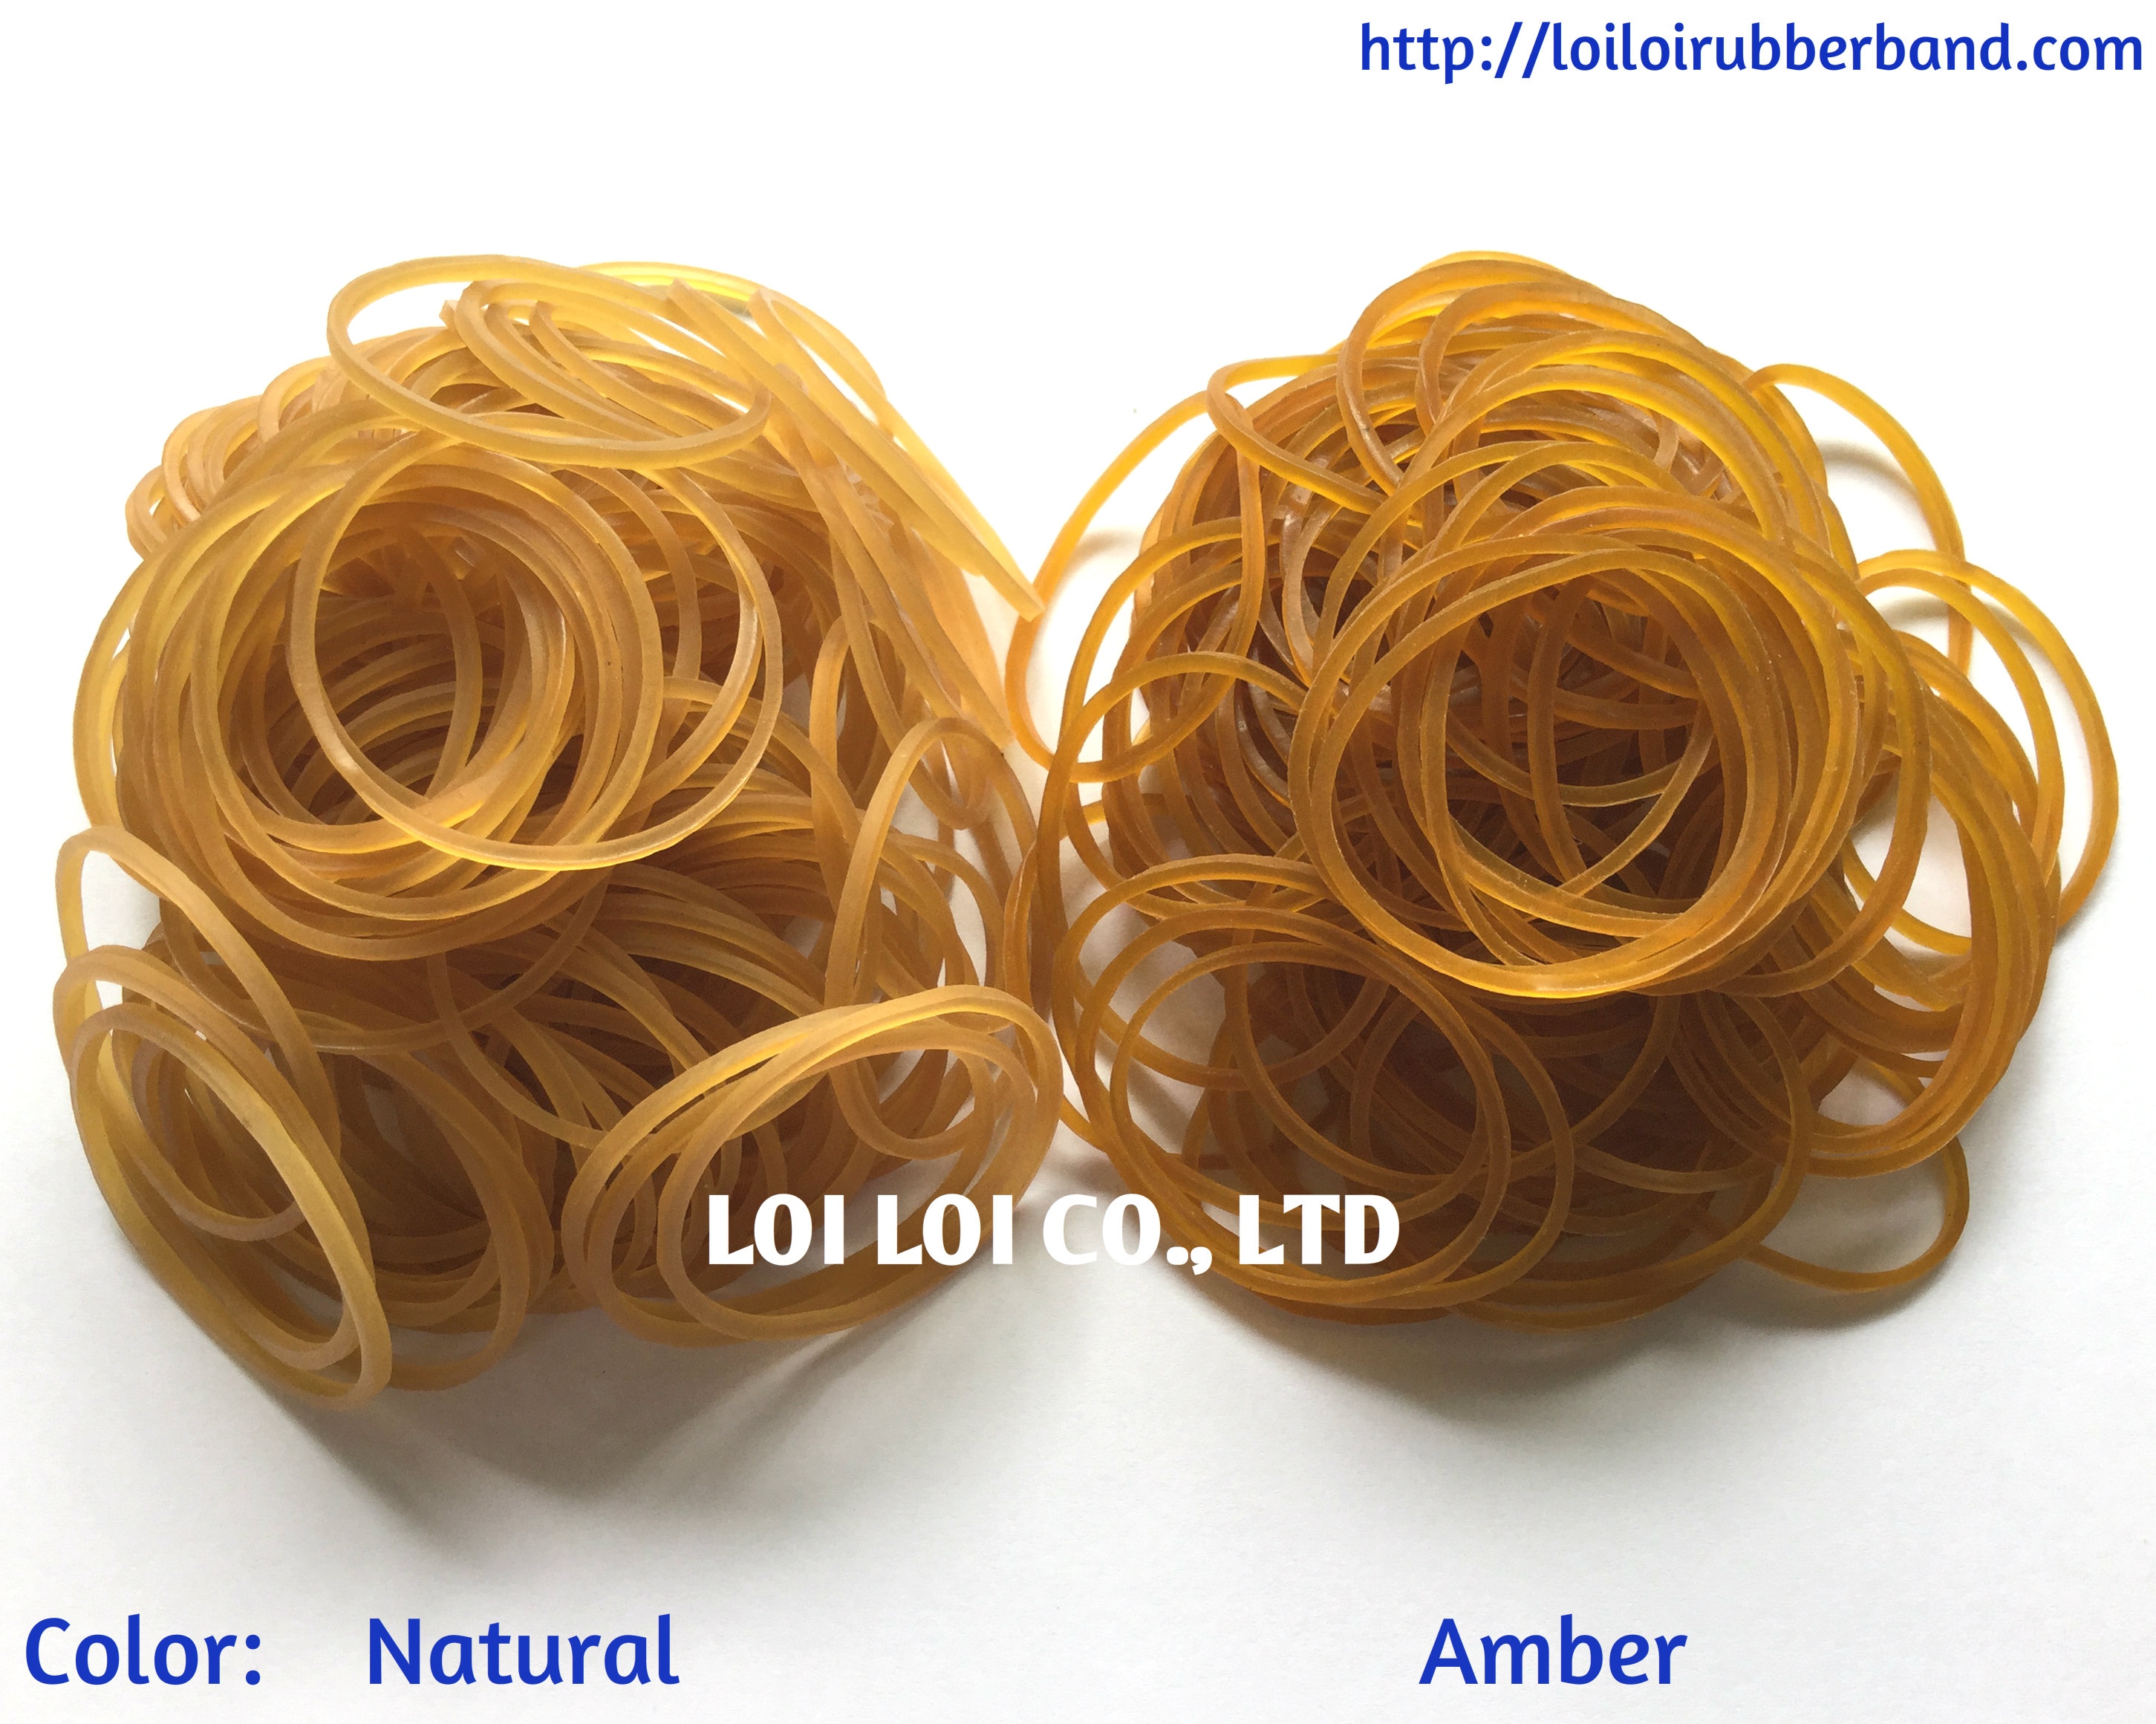 Comparing the same size of Circle rubber band with different Color tone between Natural & Amber colour 